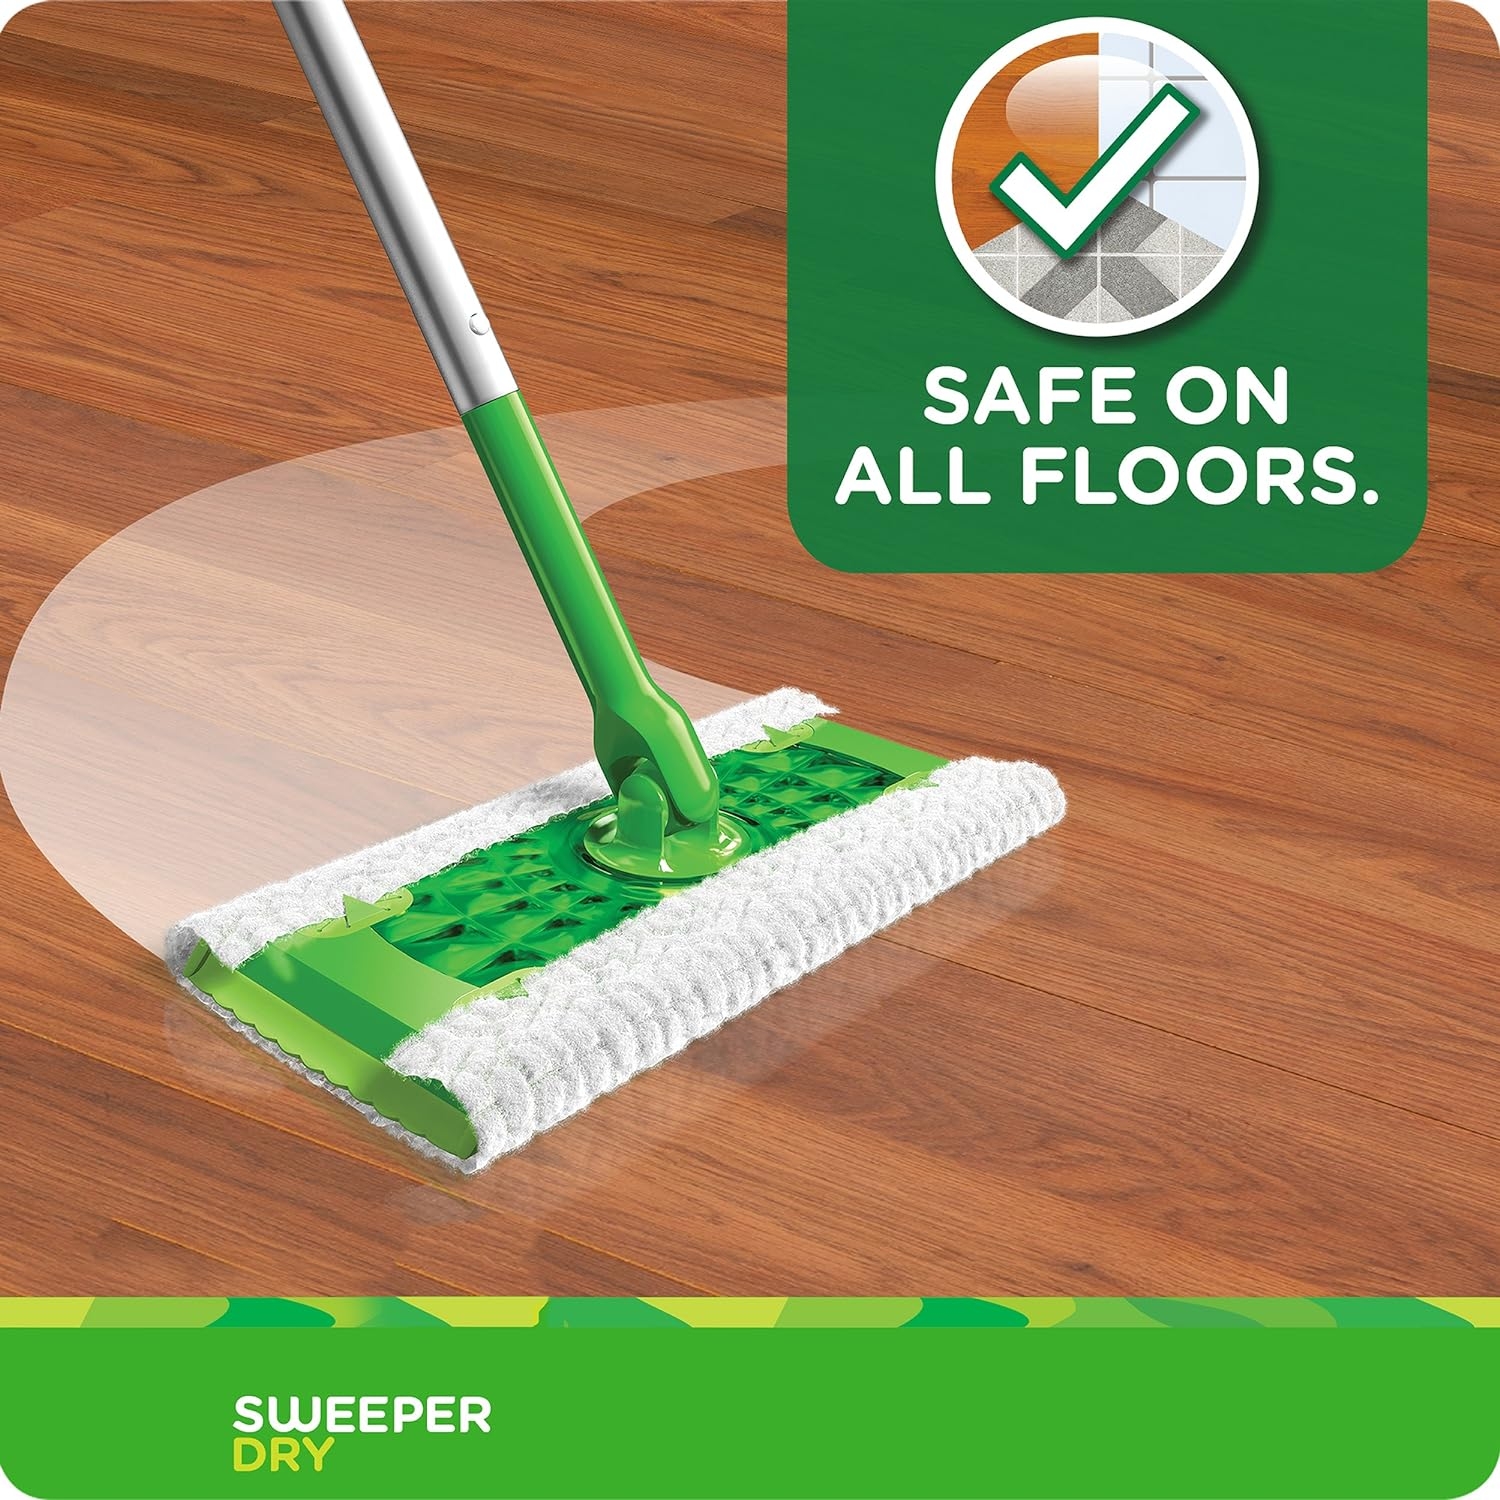 Swiffer Sweeper Dry Mop Refills for Floor Mopping and Cleaning, All Purpose Floor Cleaning Product, Unscented, 52 Count